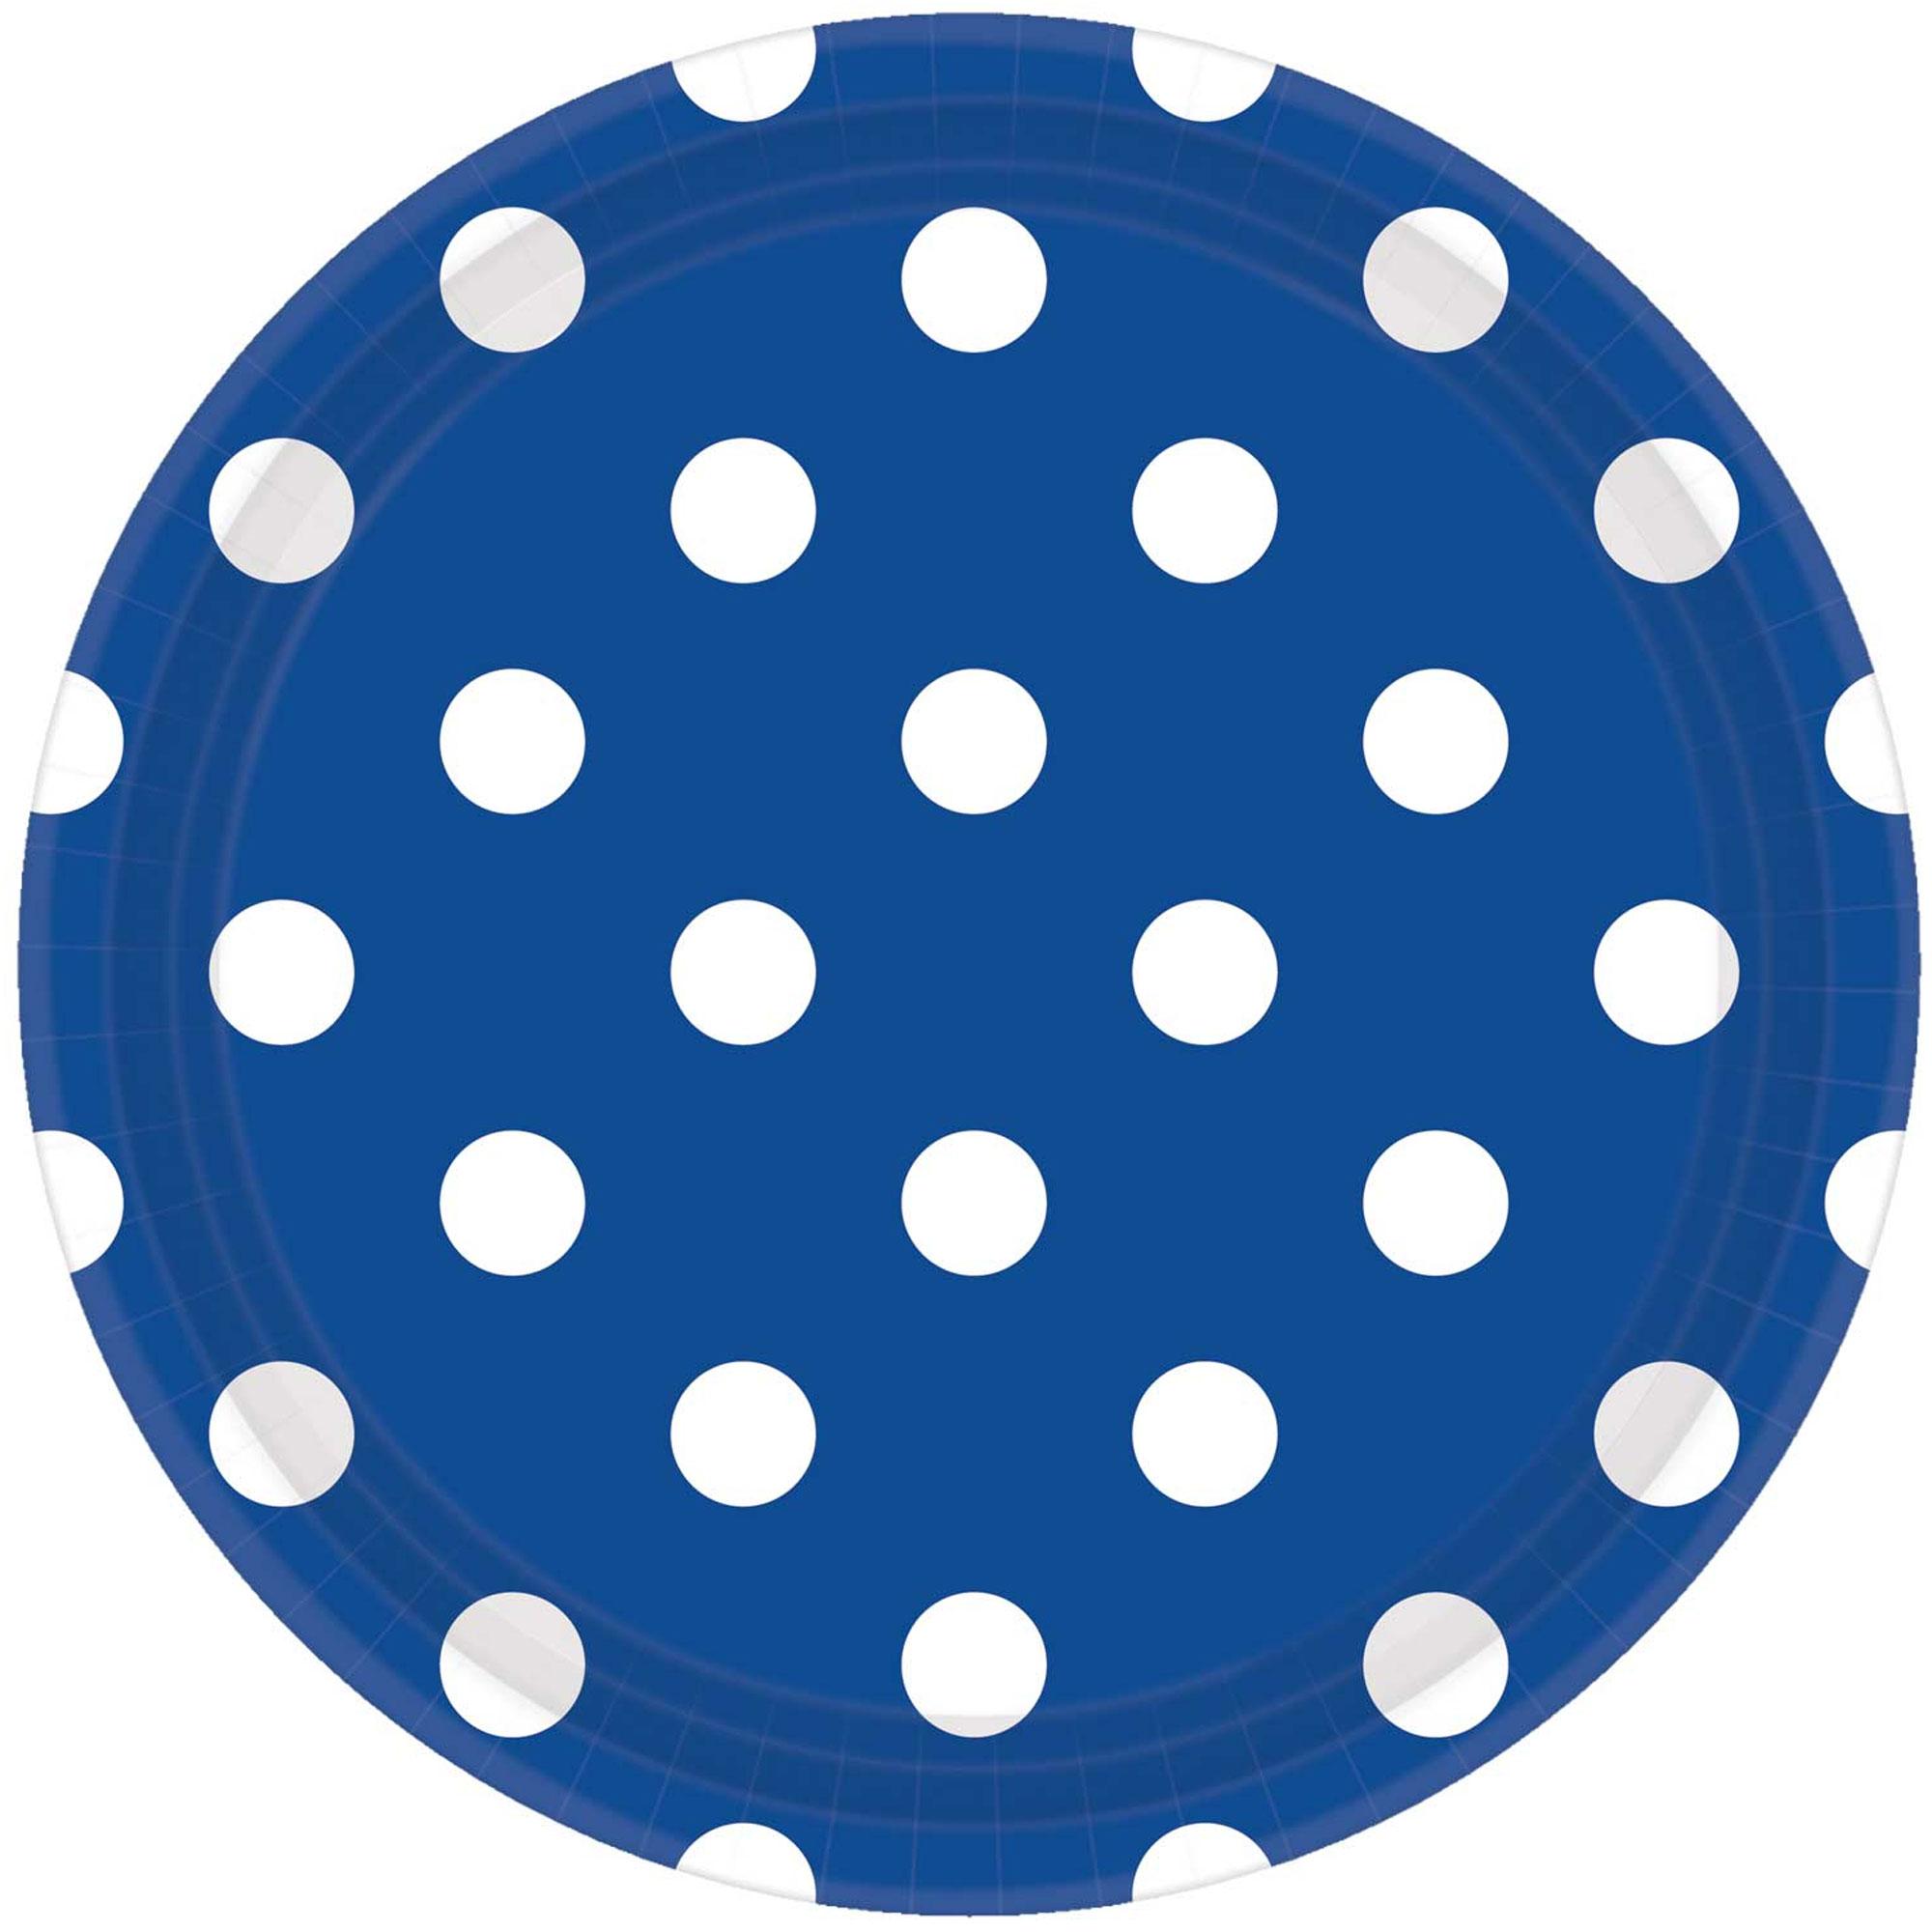 Bright Royal Blue Dots Round Party Paper Plates 9in 8pcs Printed Tableware - Party Centre